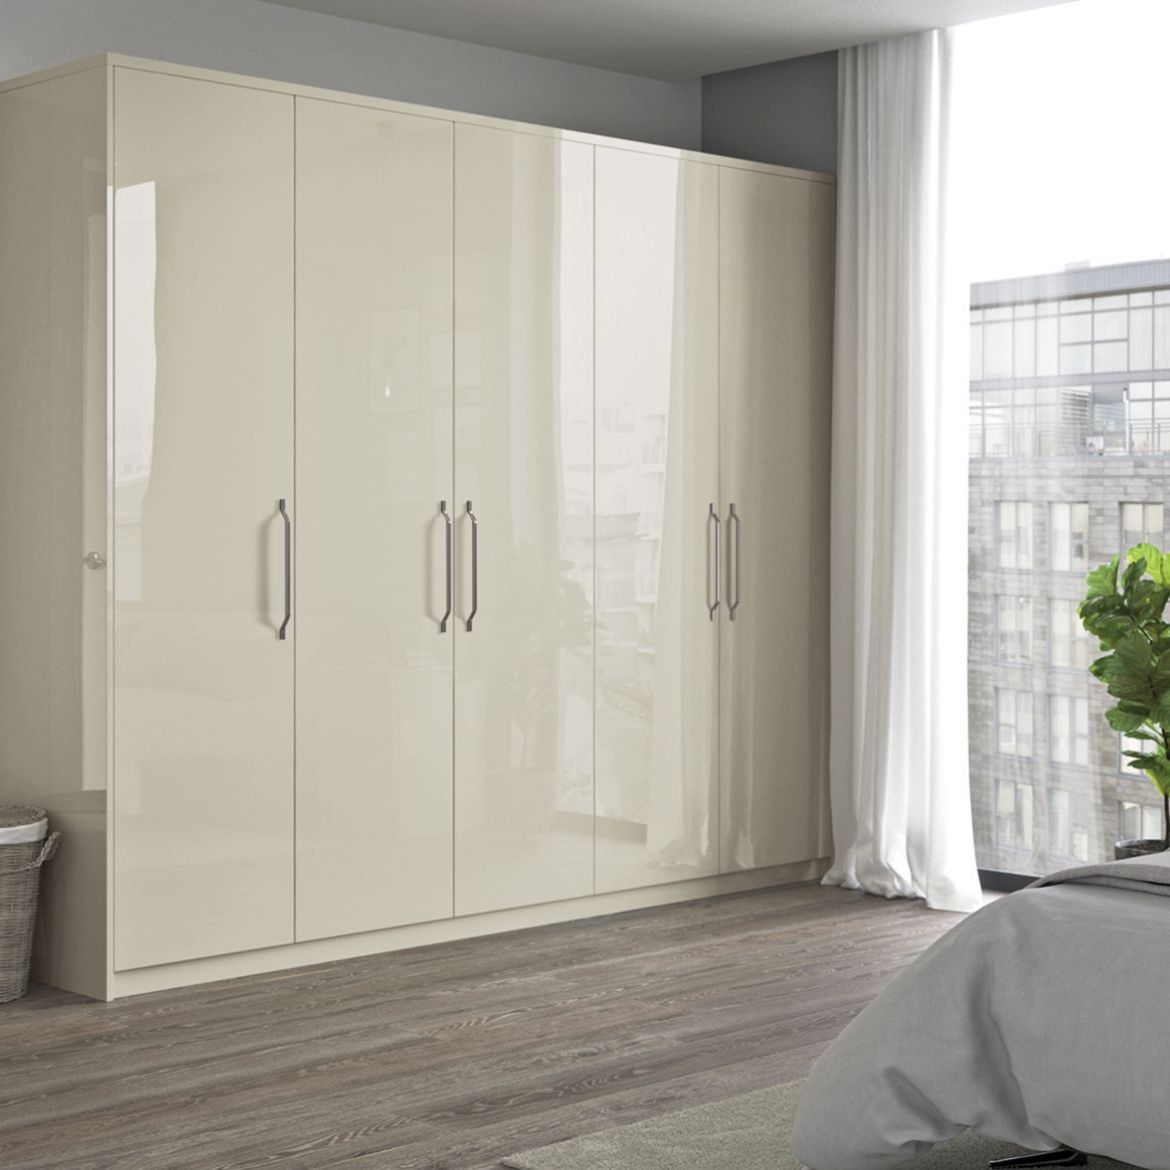 Reflections Wardrobe | Cash & Carry Kitchens Regarding White High Gloss Wardrobes (View 16 of 20)